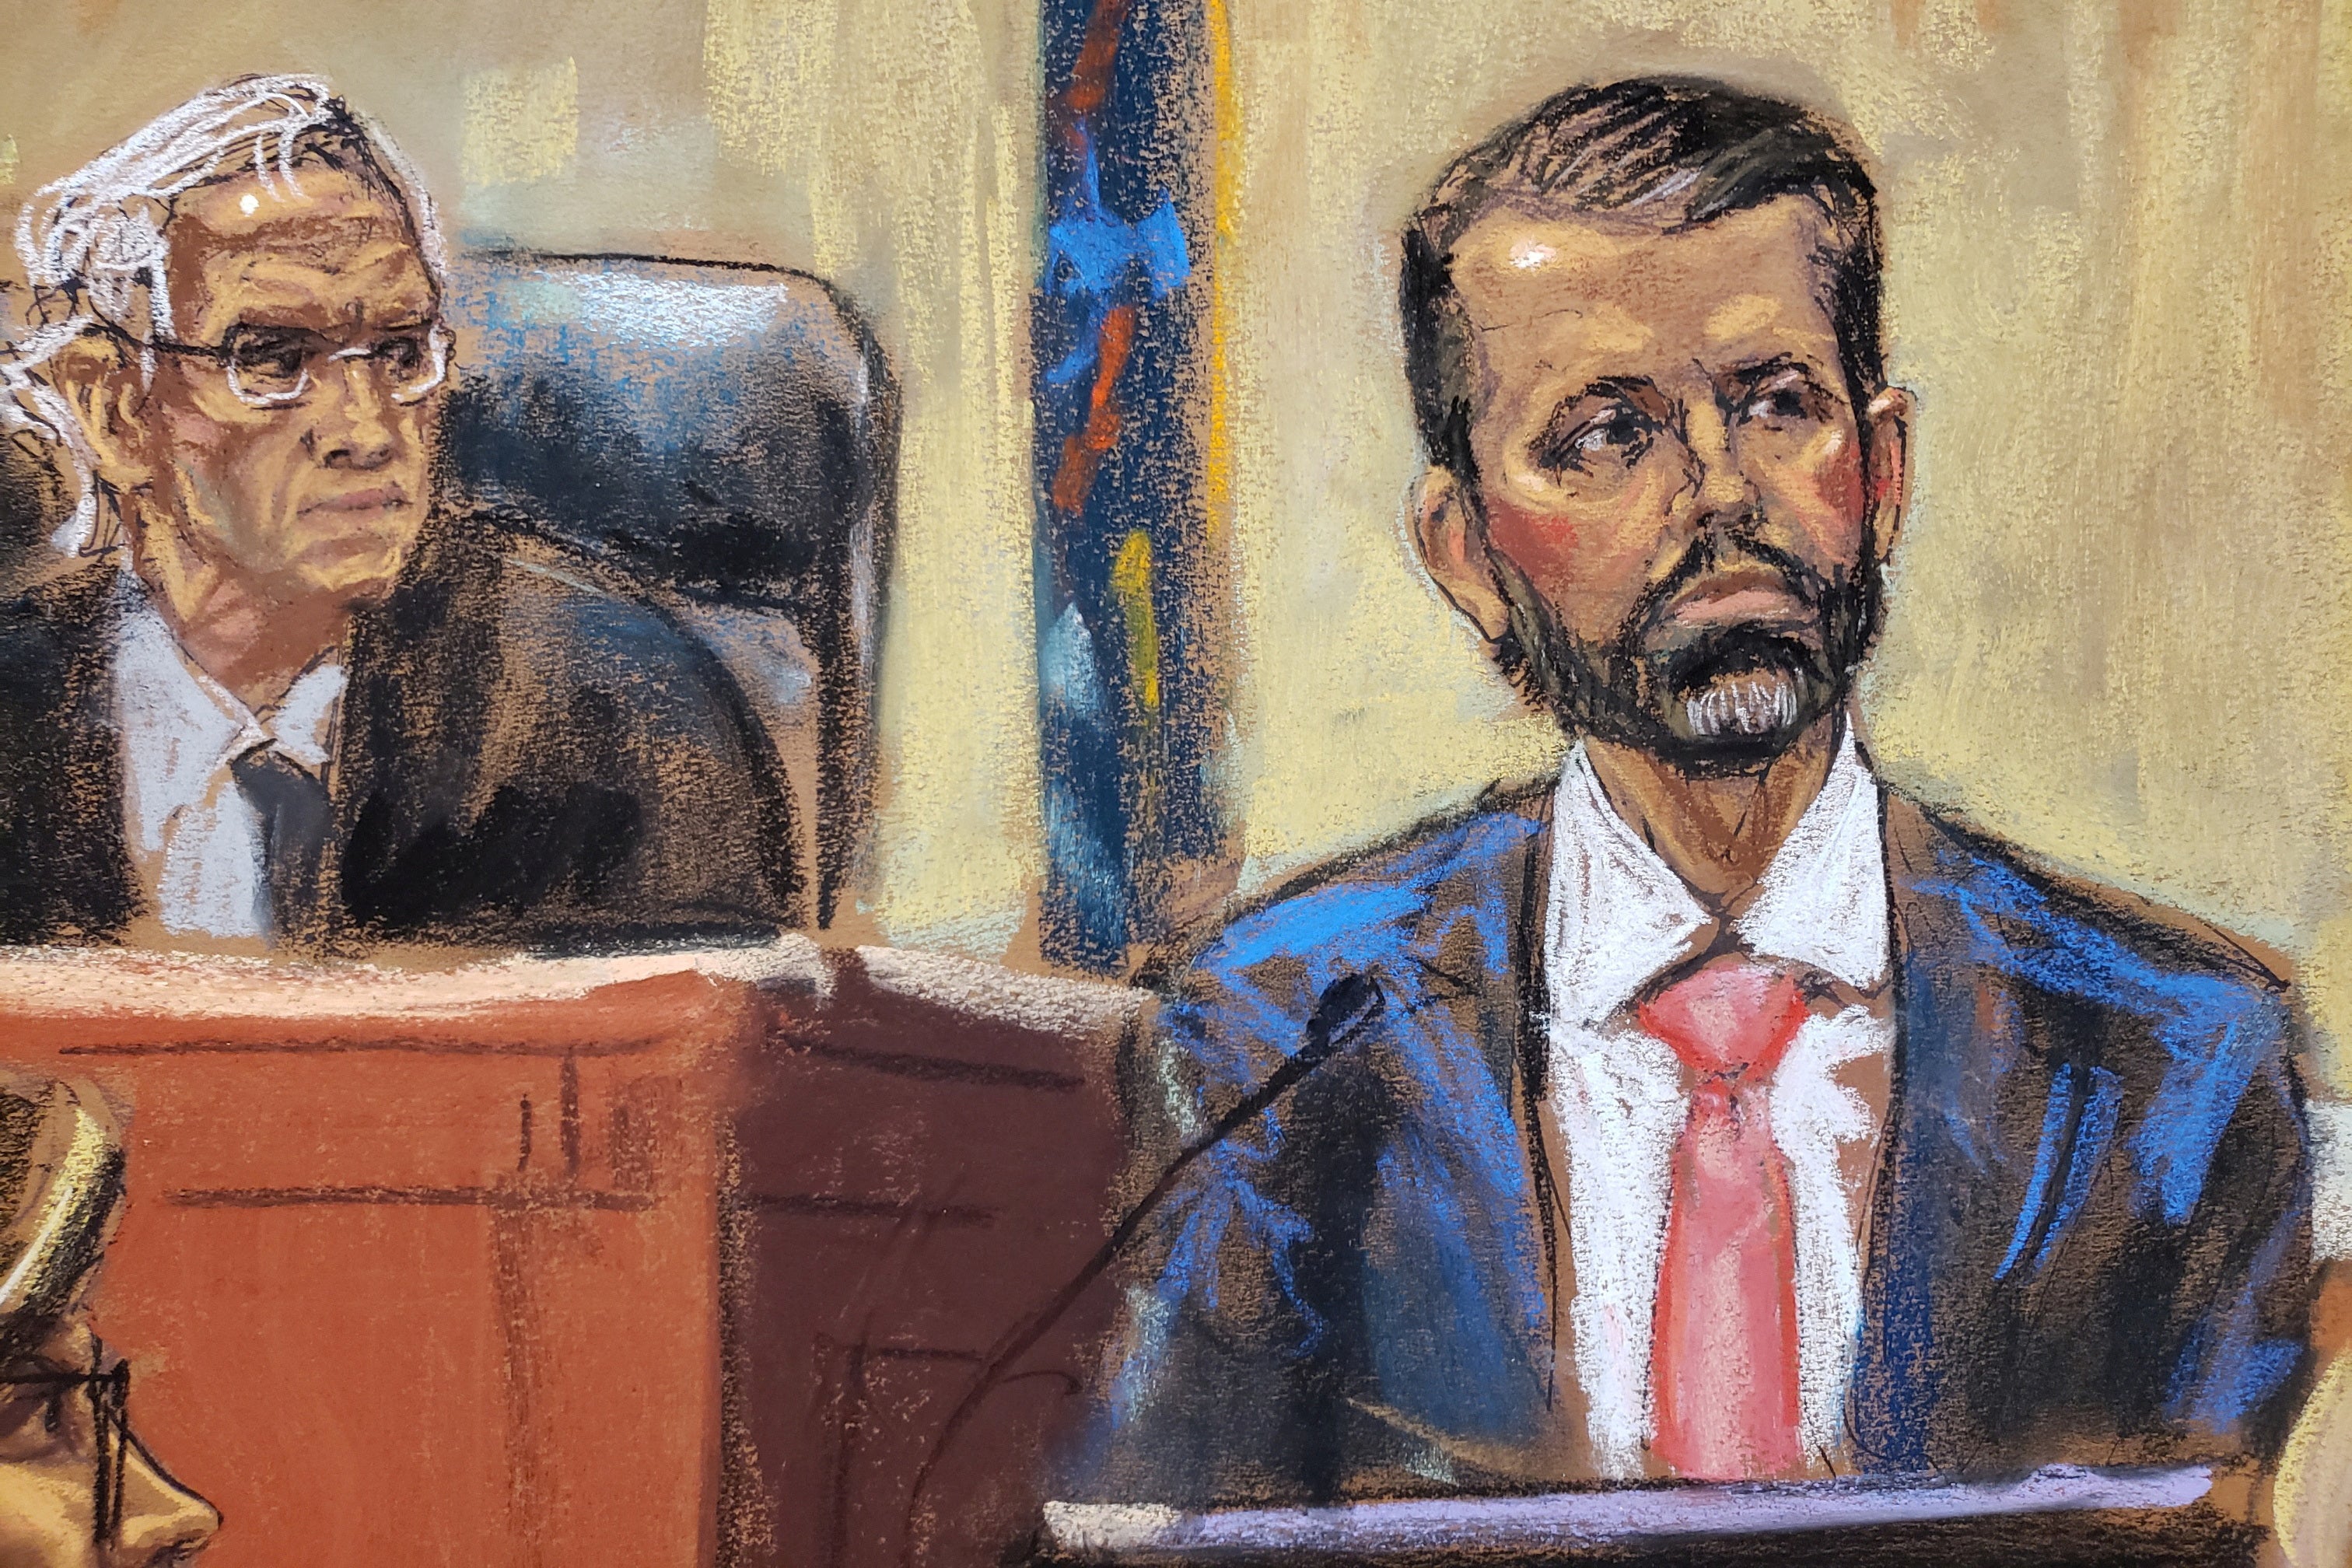 A courtroom sketch depictes Donald Trump Jr on the witness stand next to Judge Arthur Engoron on 1 November